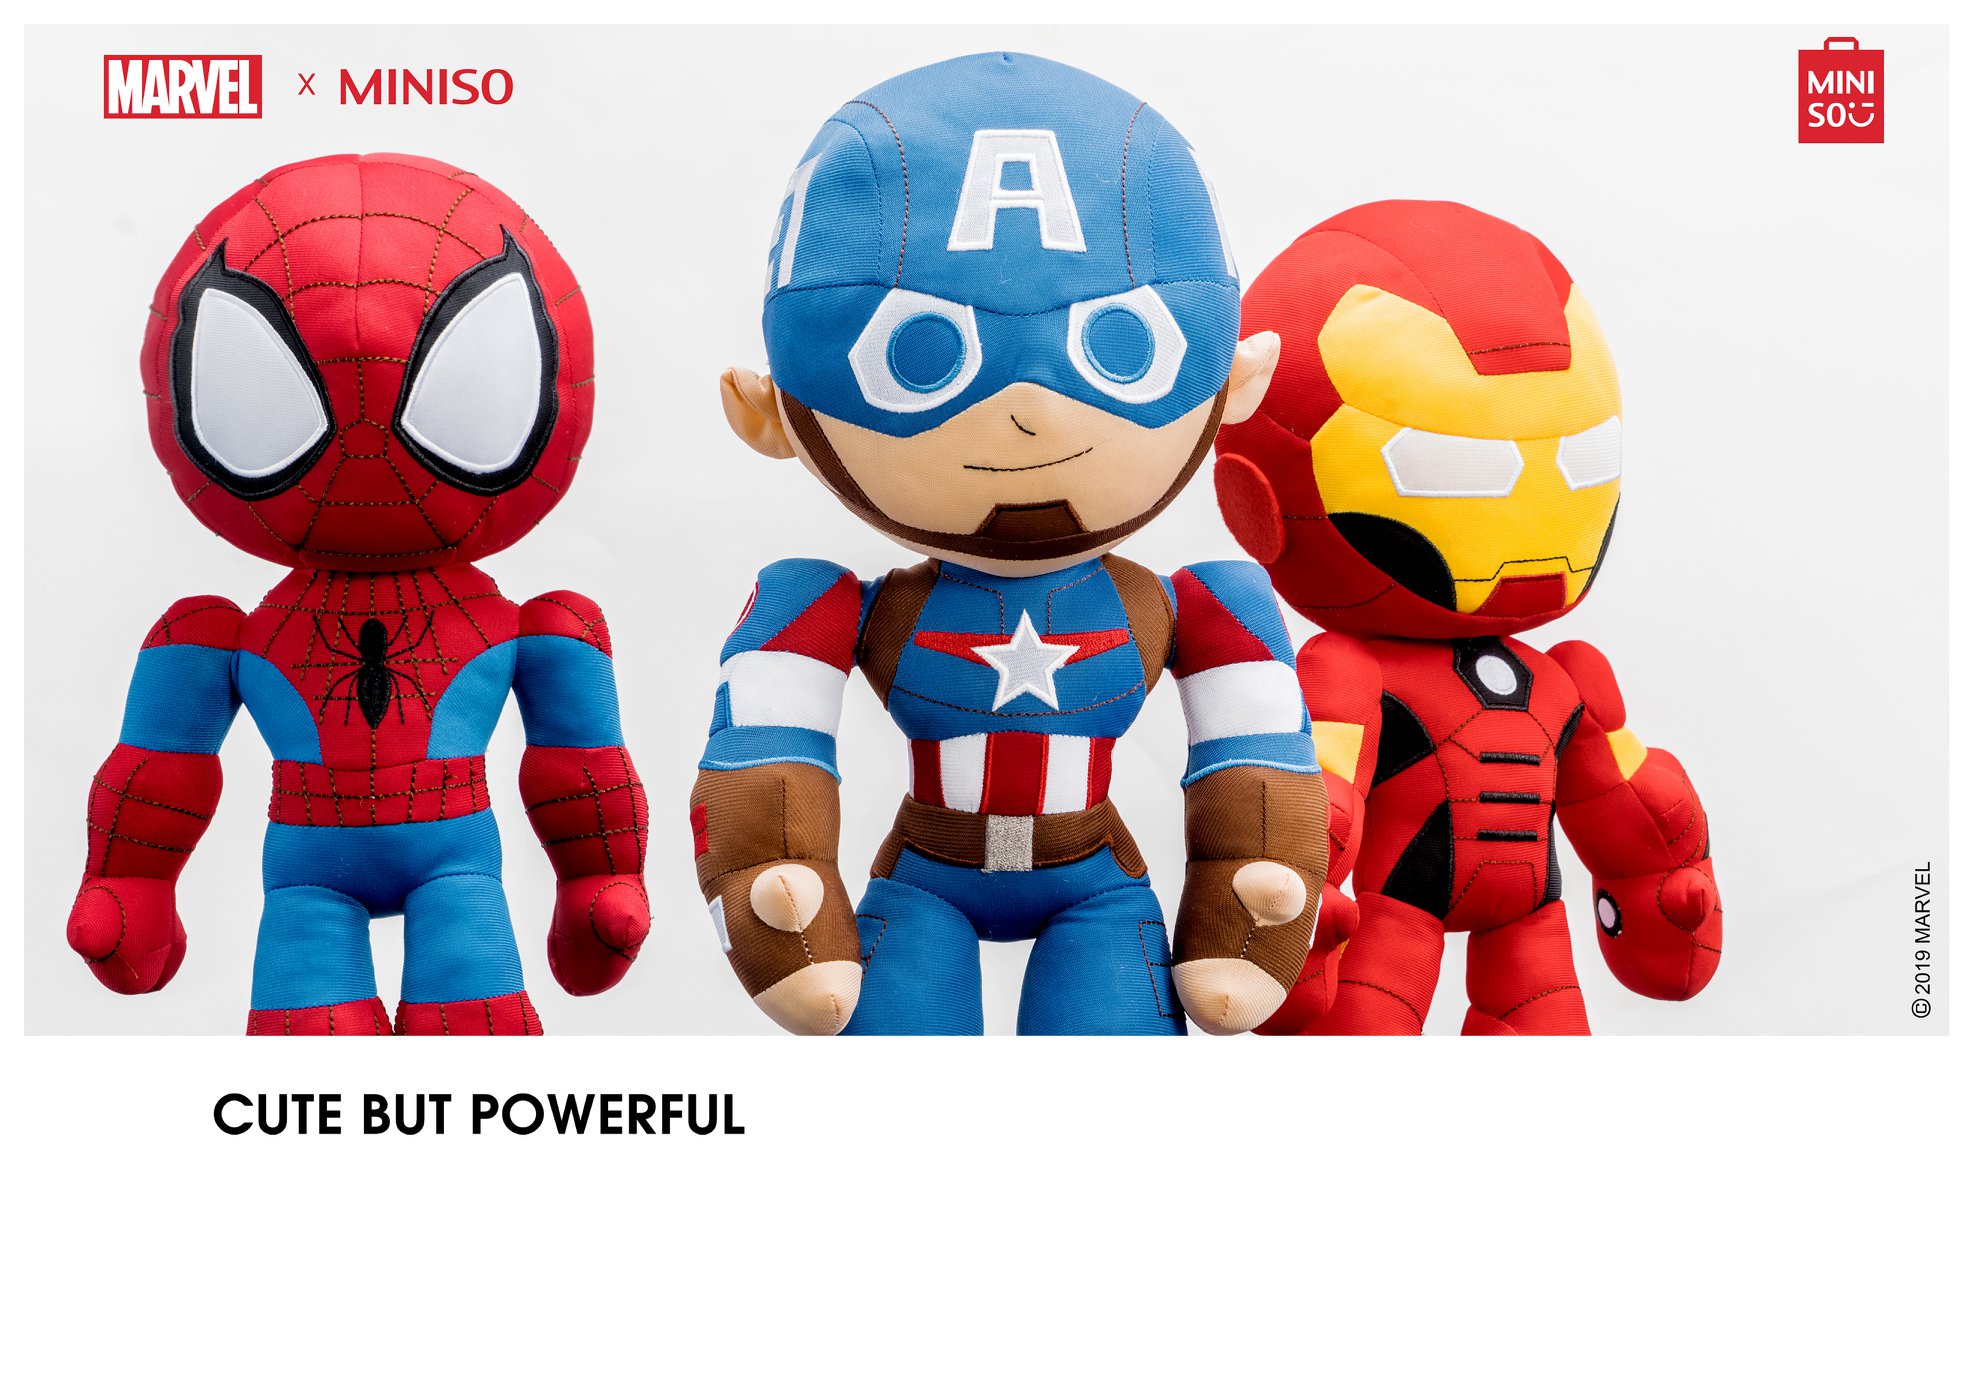 Miniso x Marvel merchandise to be launched in Singapore on 5 July 2019 - 2